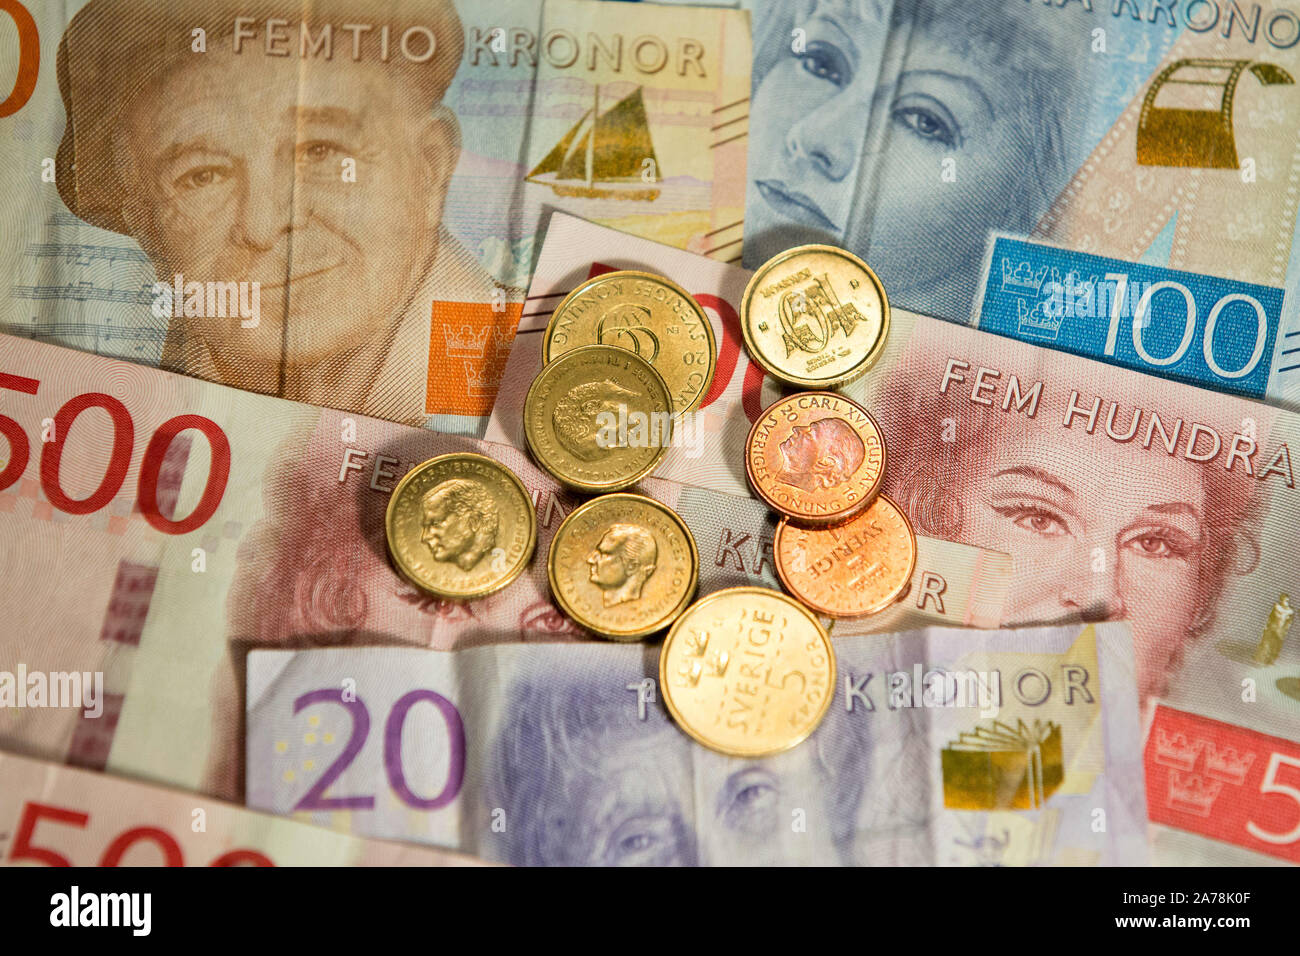 Swedish Krona High Resolution Stock Photography and Images - Alamy